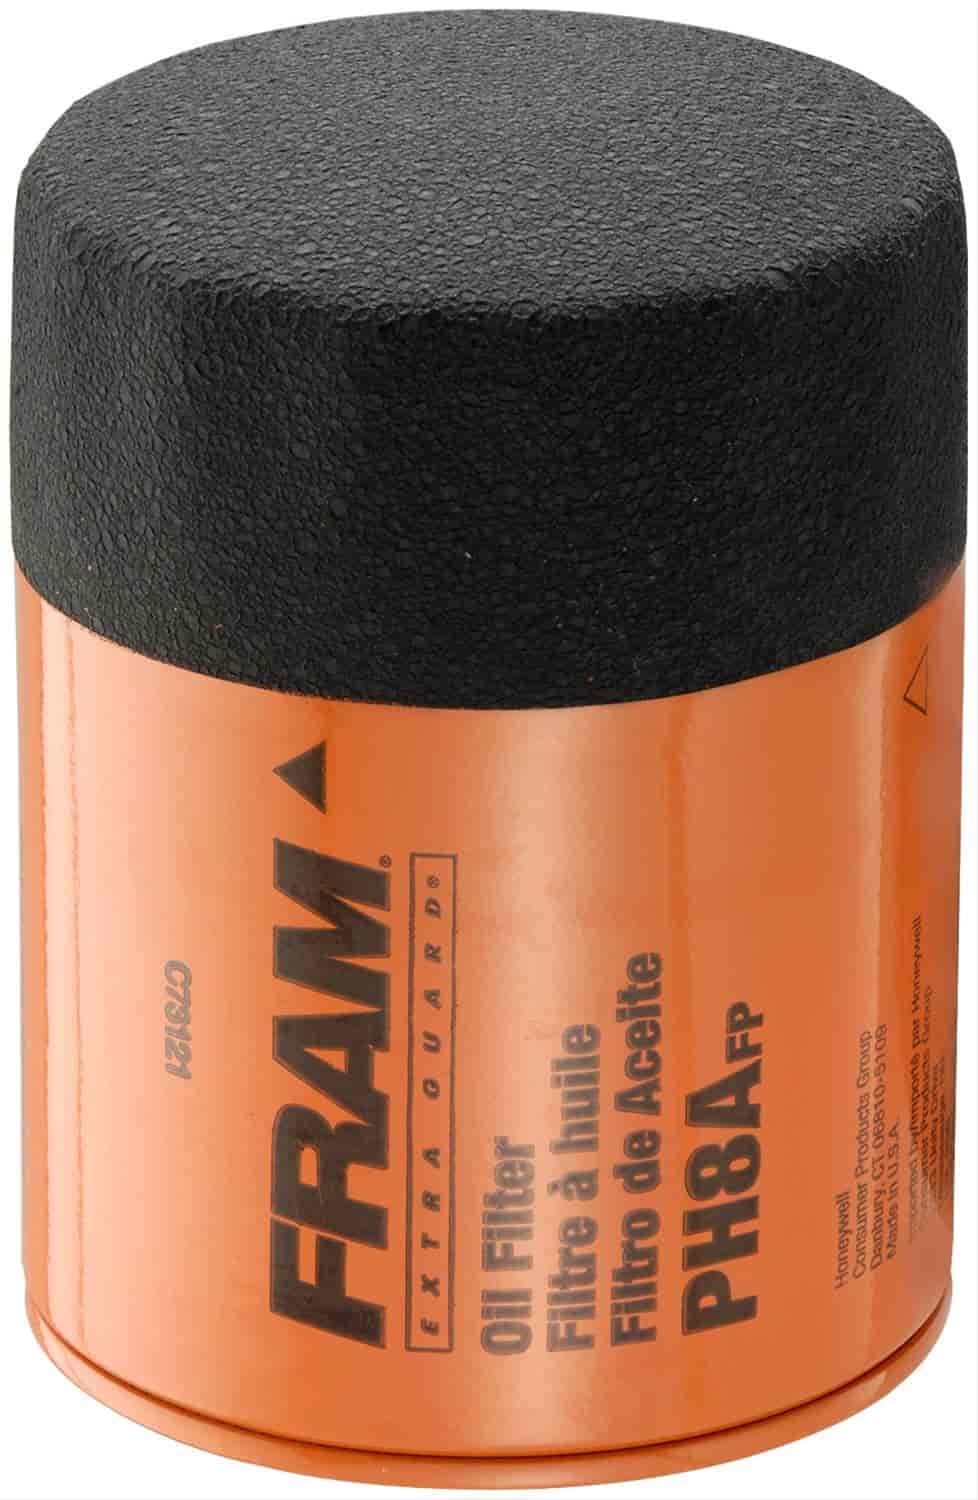 Spin-On Oil Filter Fits Select Chrysler, Dodge, Ford, Jeep, Lexus, Lincoln, Mazda, Mercury, Nissan, Plymouth, Toyota